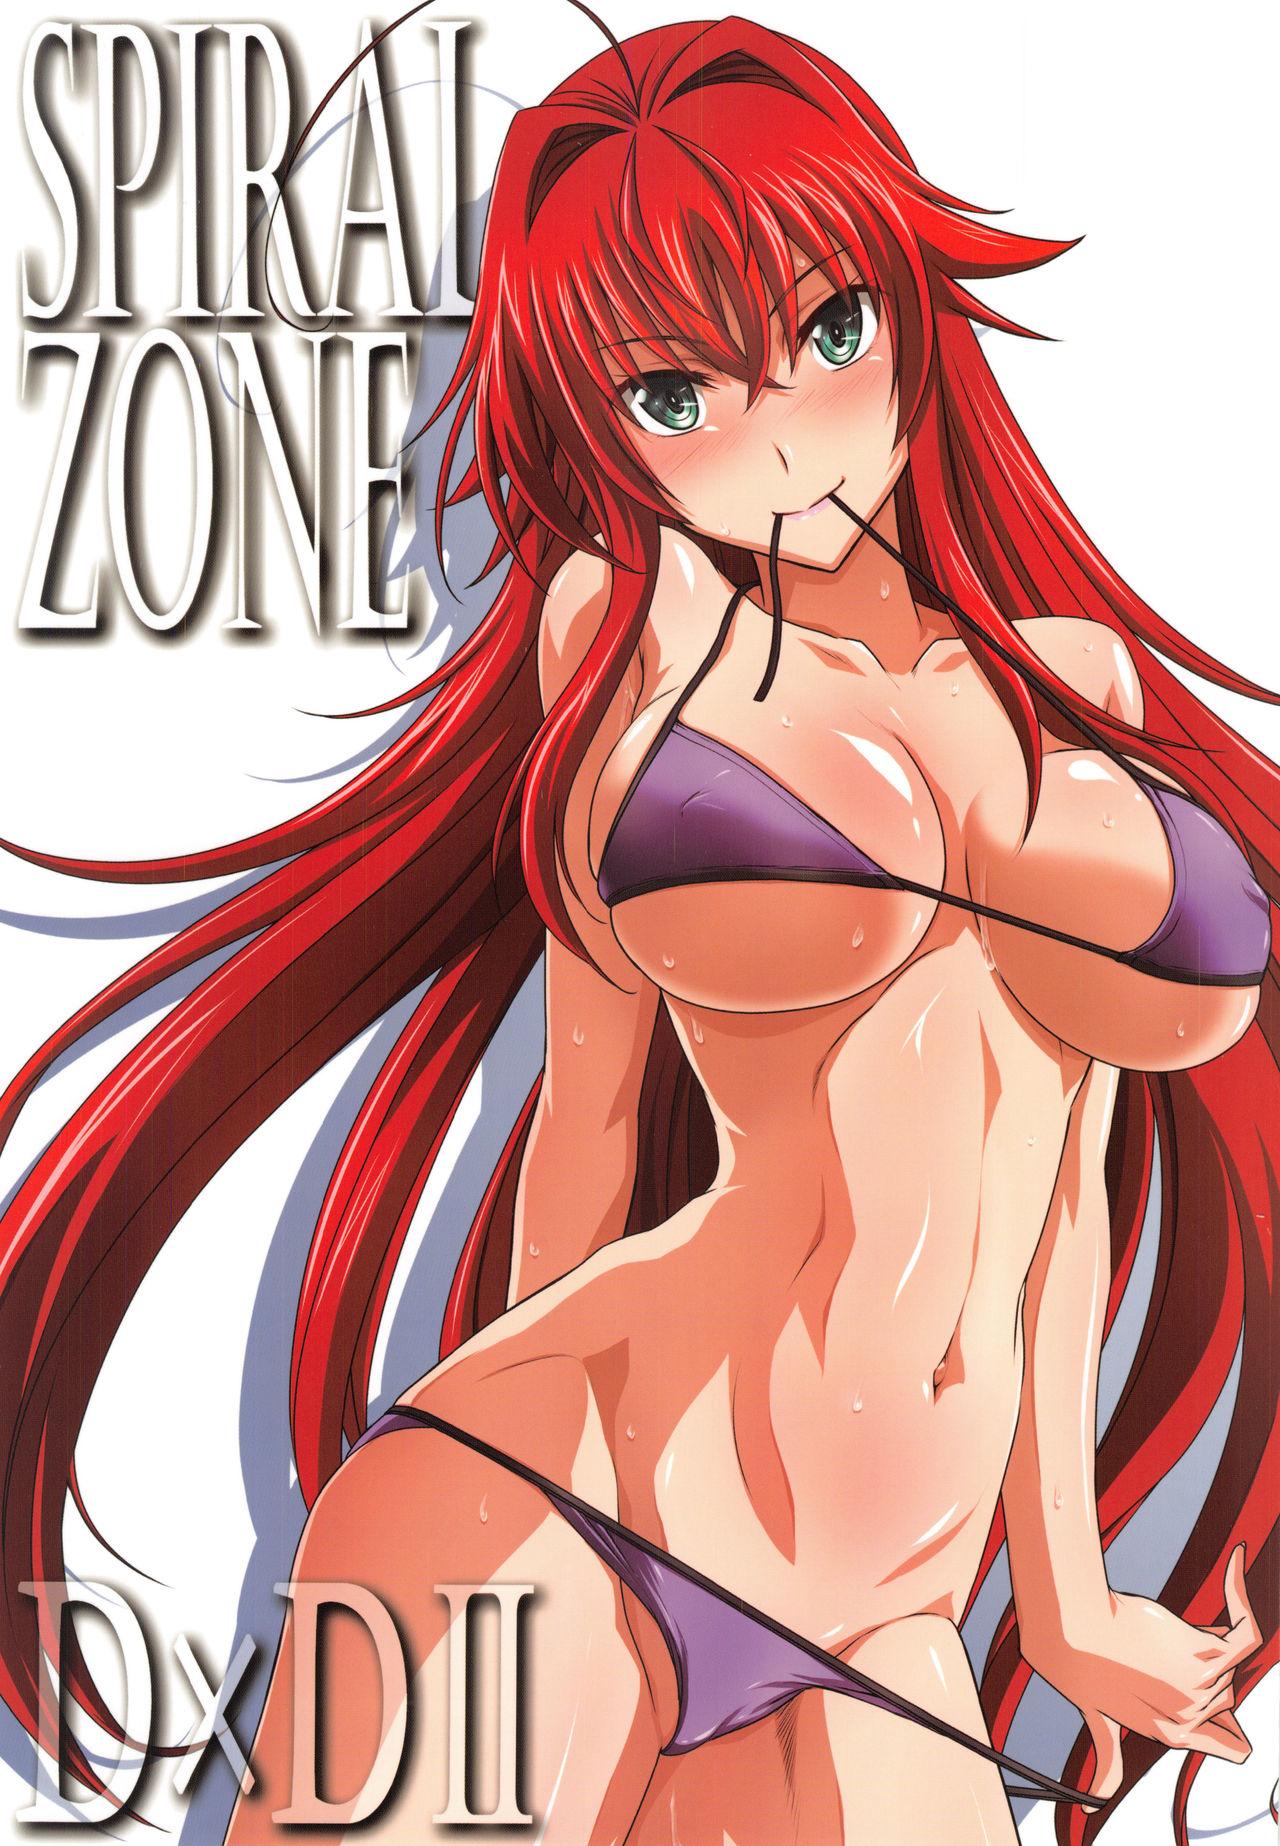 Hot Whores SPIRAL ZONE DxD II - Highschool dxd Scene - Page 1